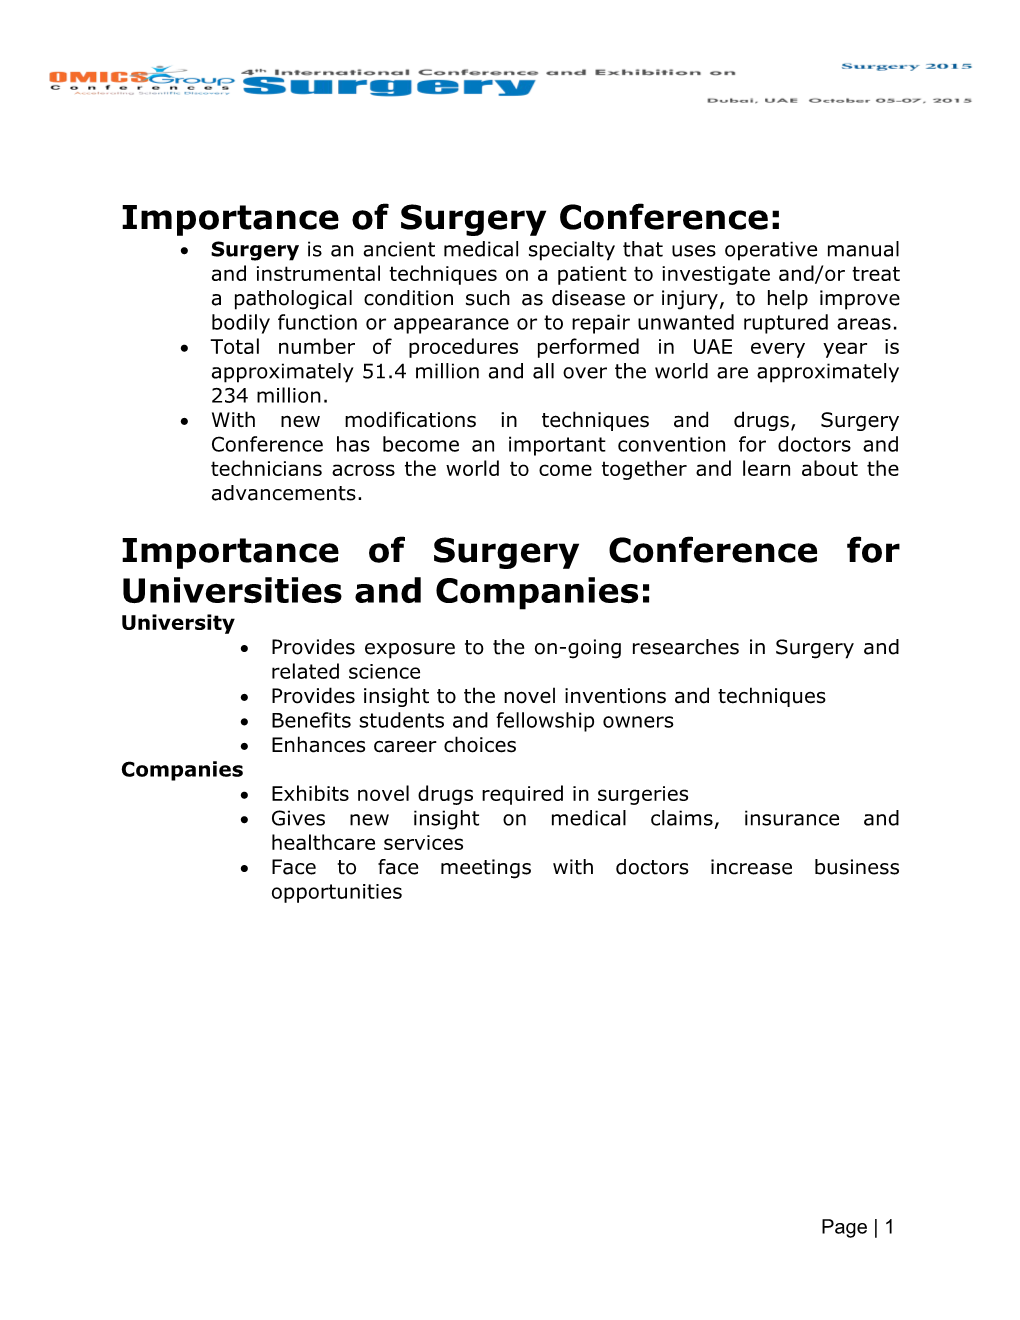 Importance of Surgery Conference